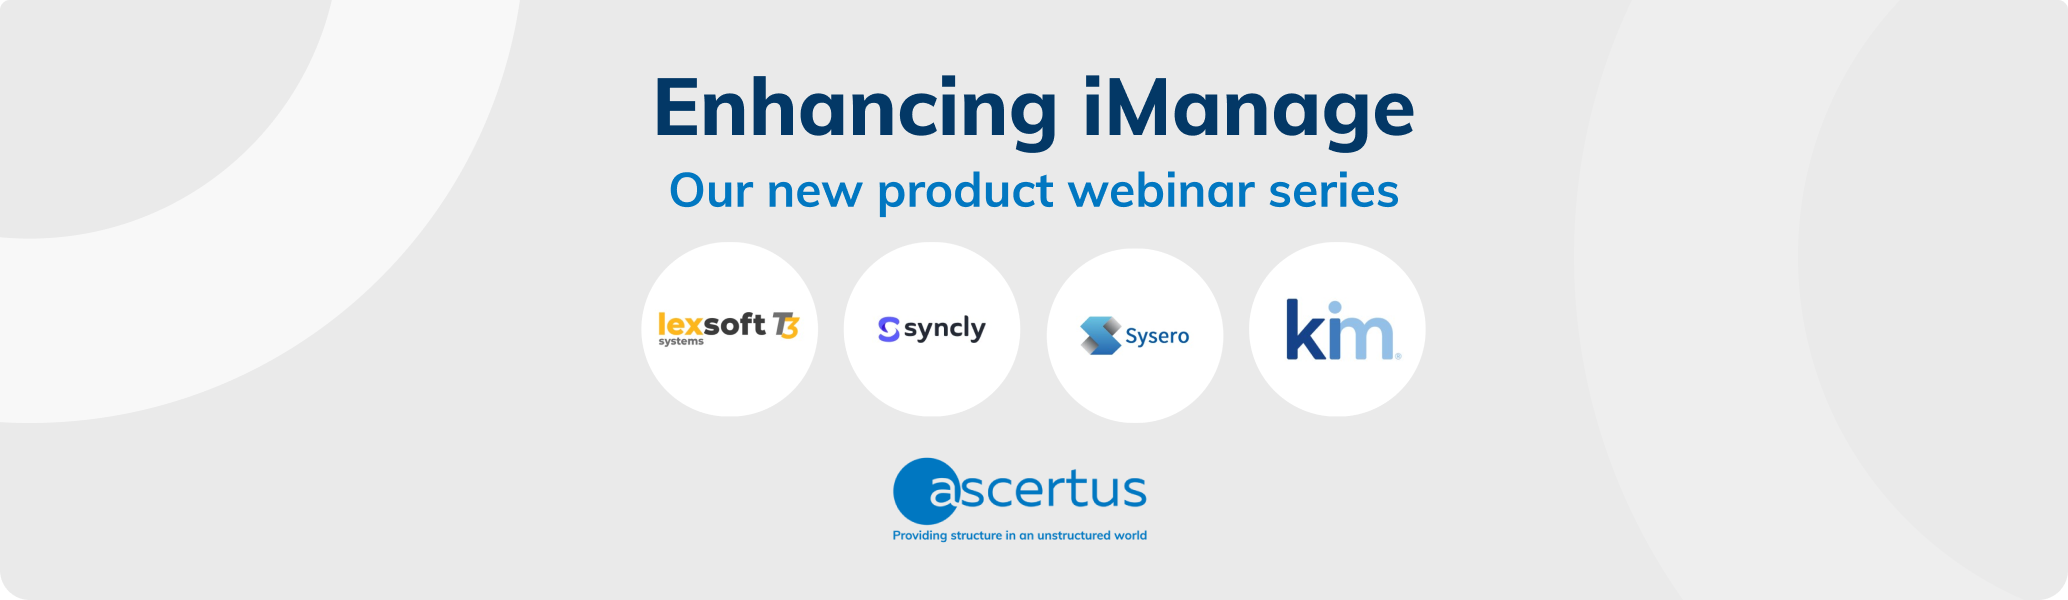 We’re excited to announce our new product webinar series